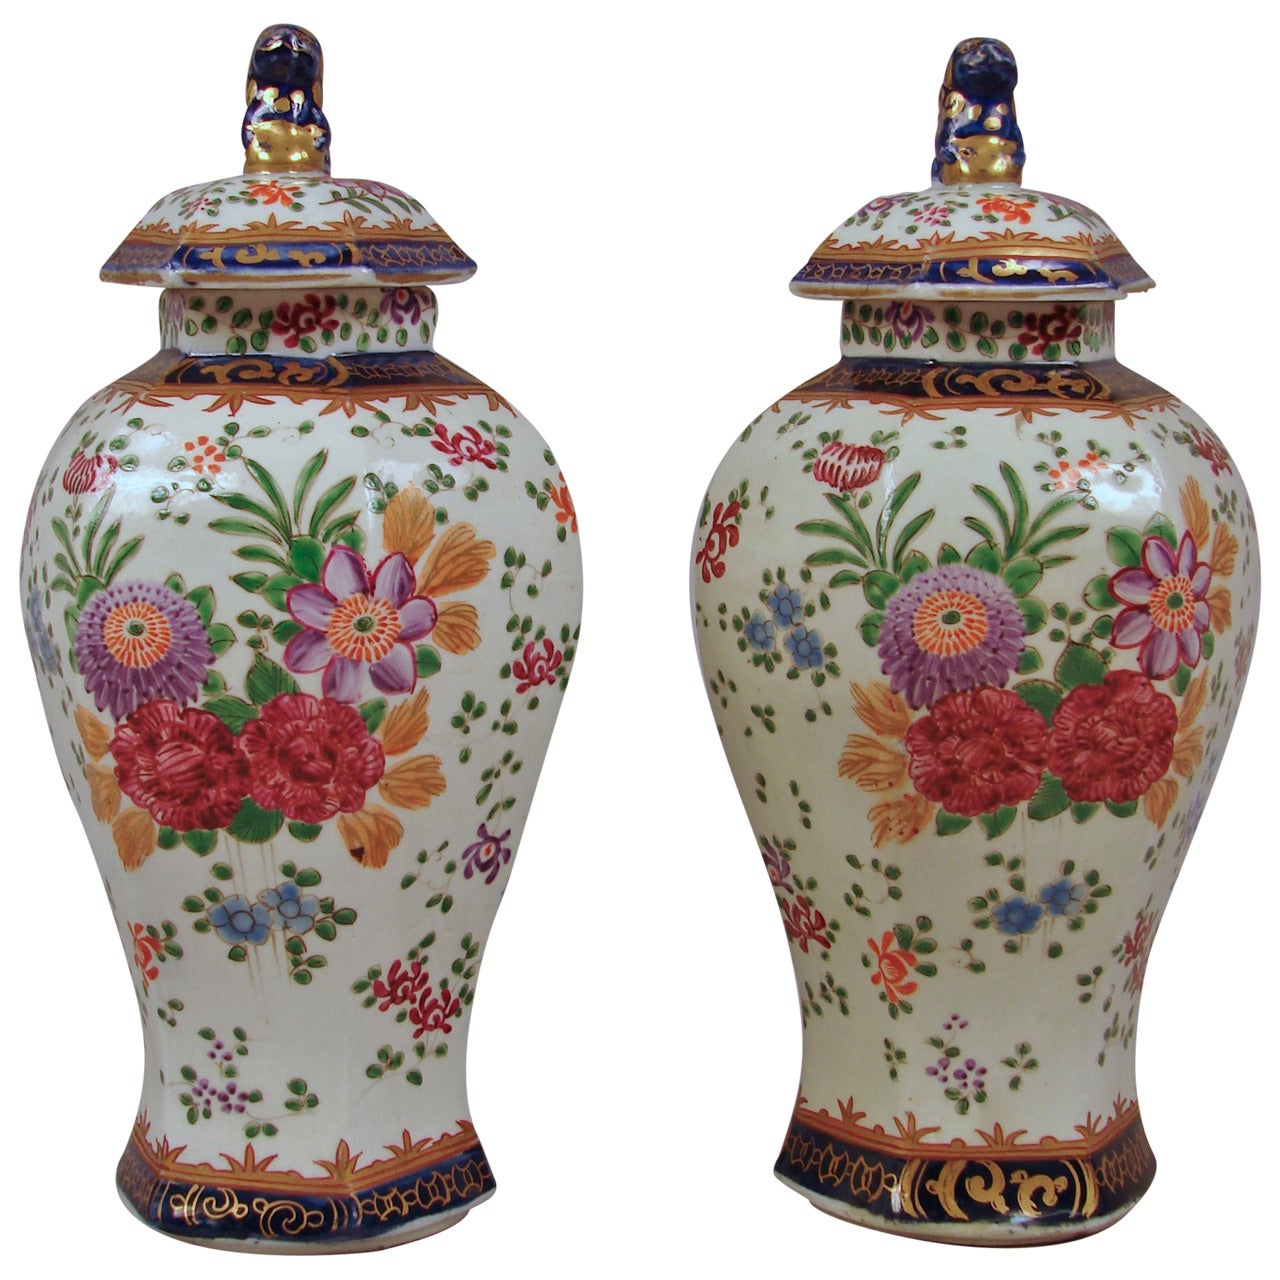 French Porcelain Vases in the Chinese Taste